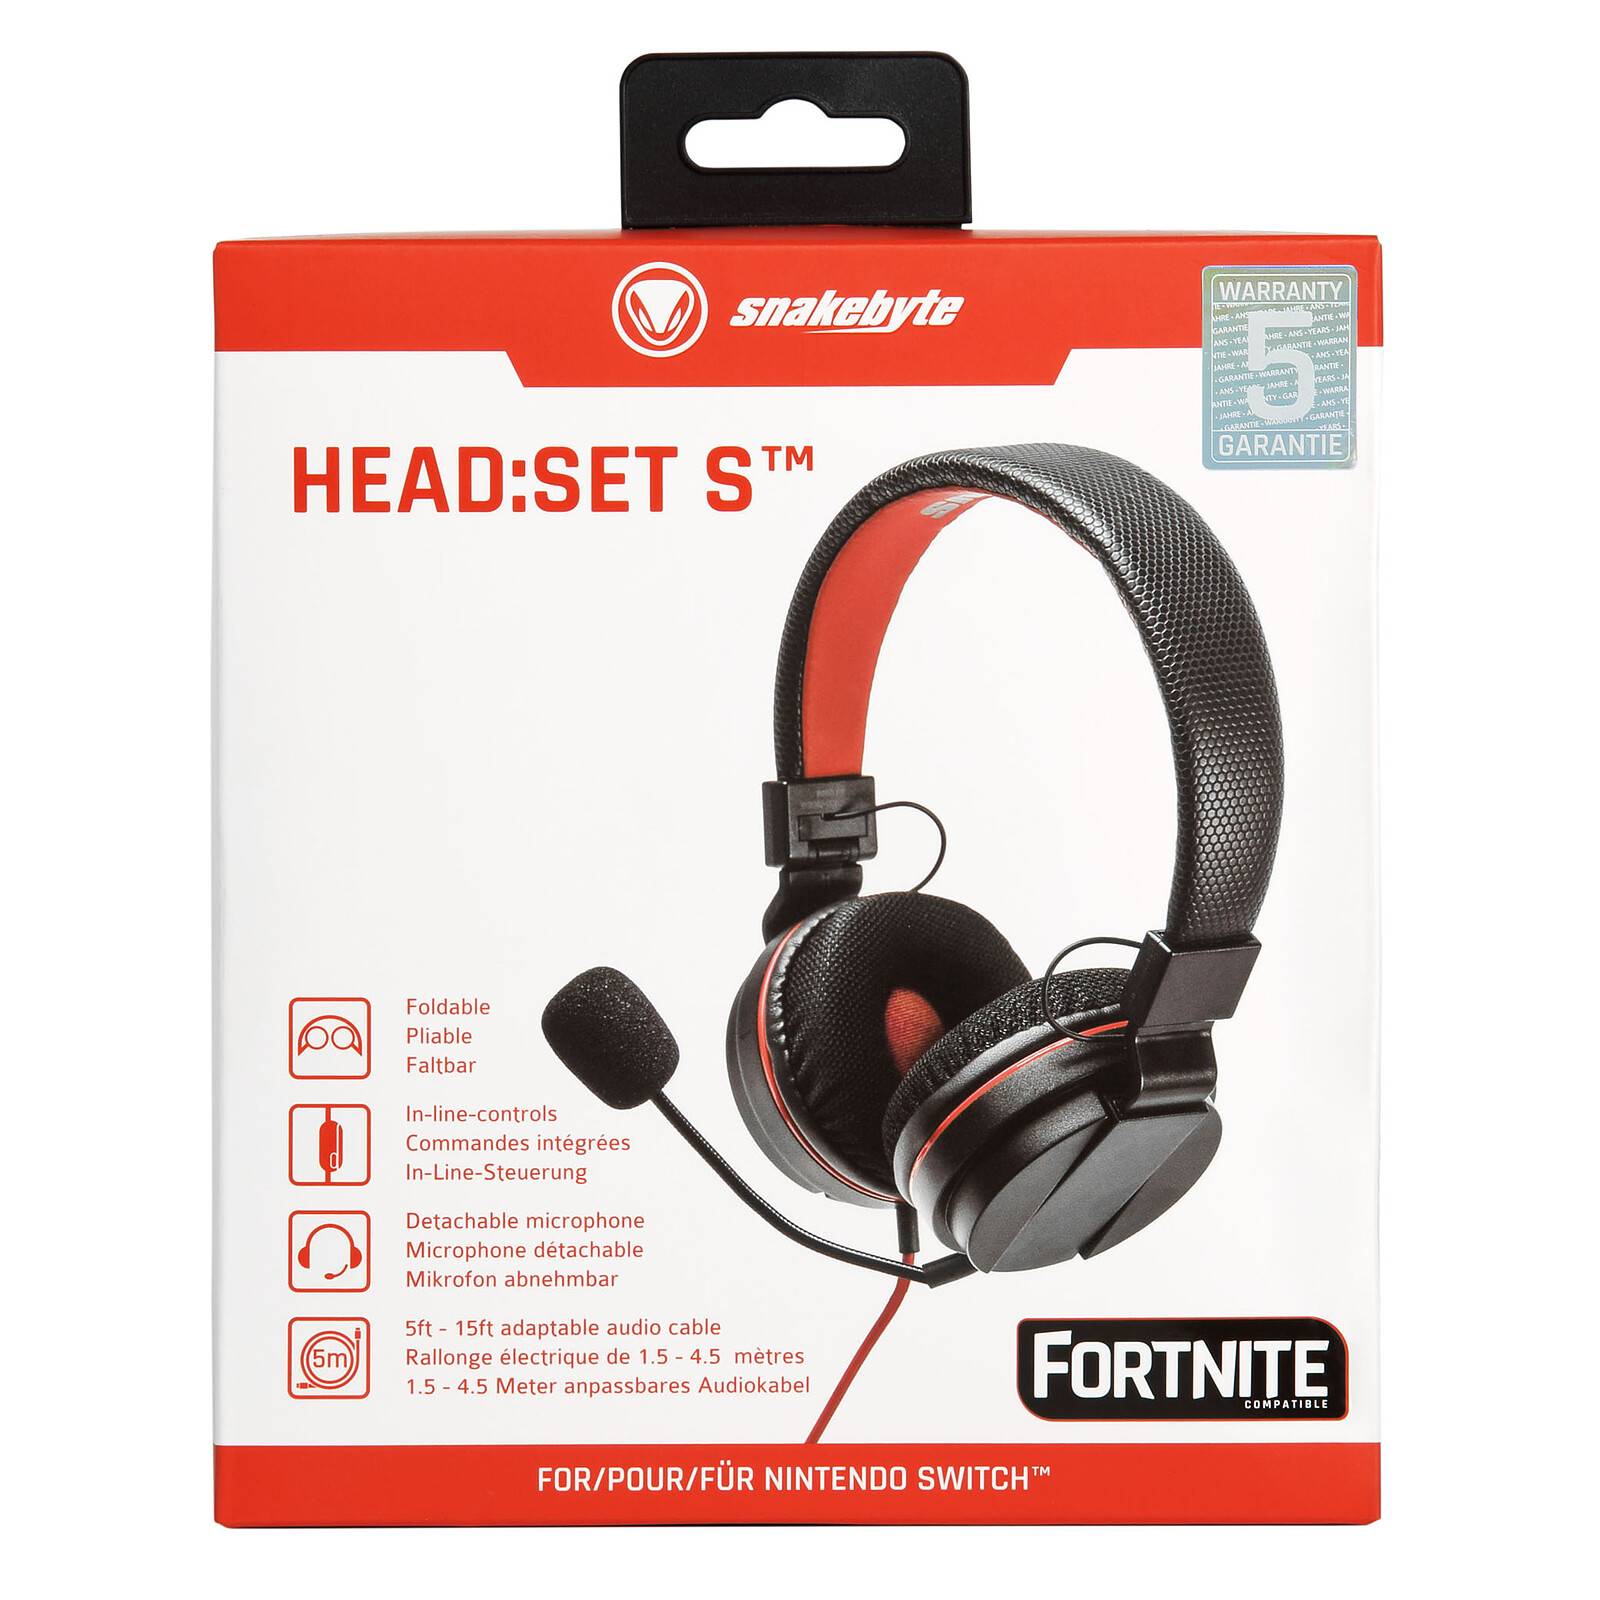 snakebyte - Casque micro pour Nintendo Switch - Accessoires Switch